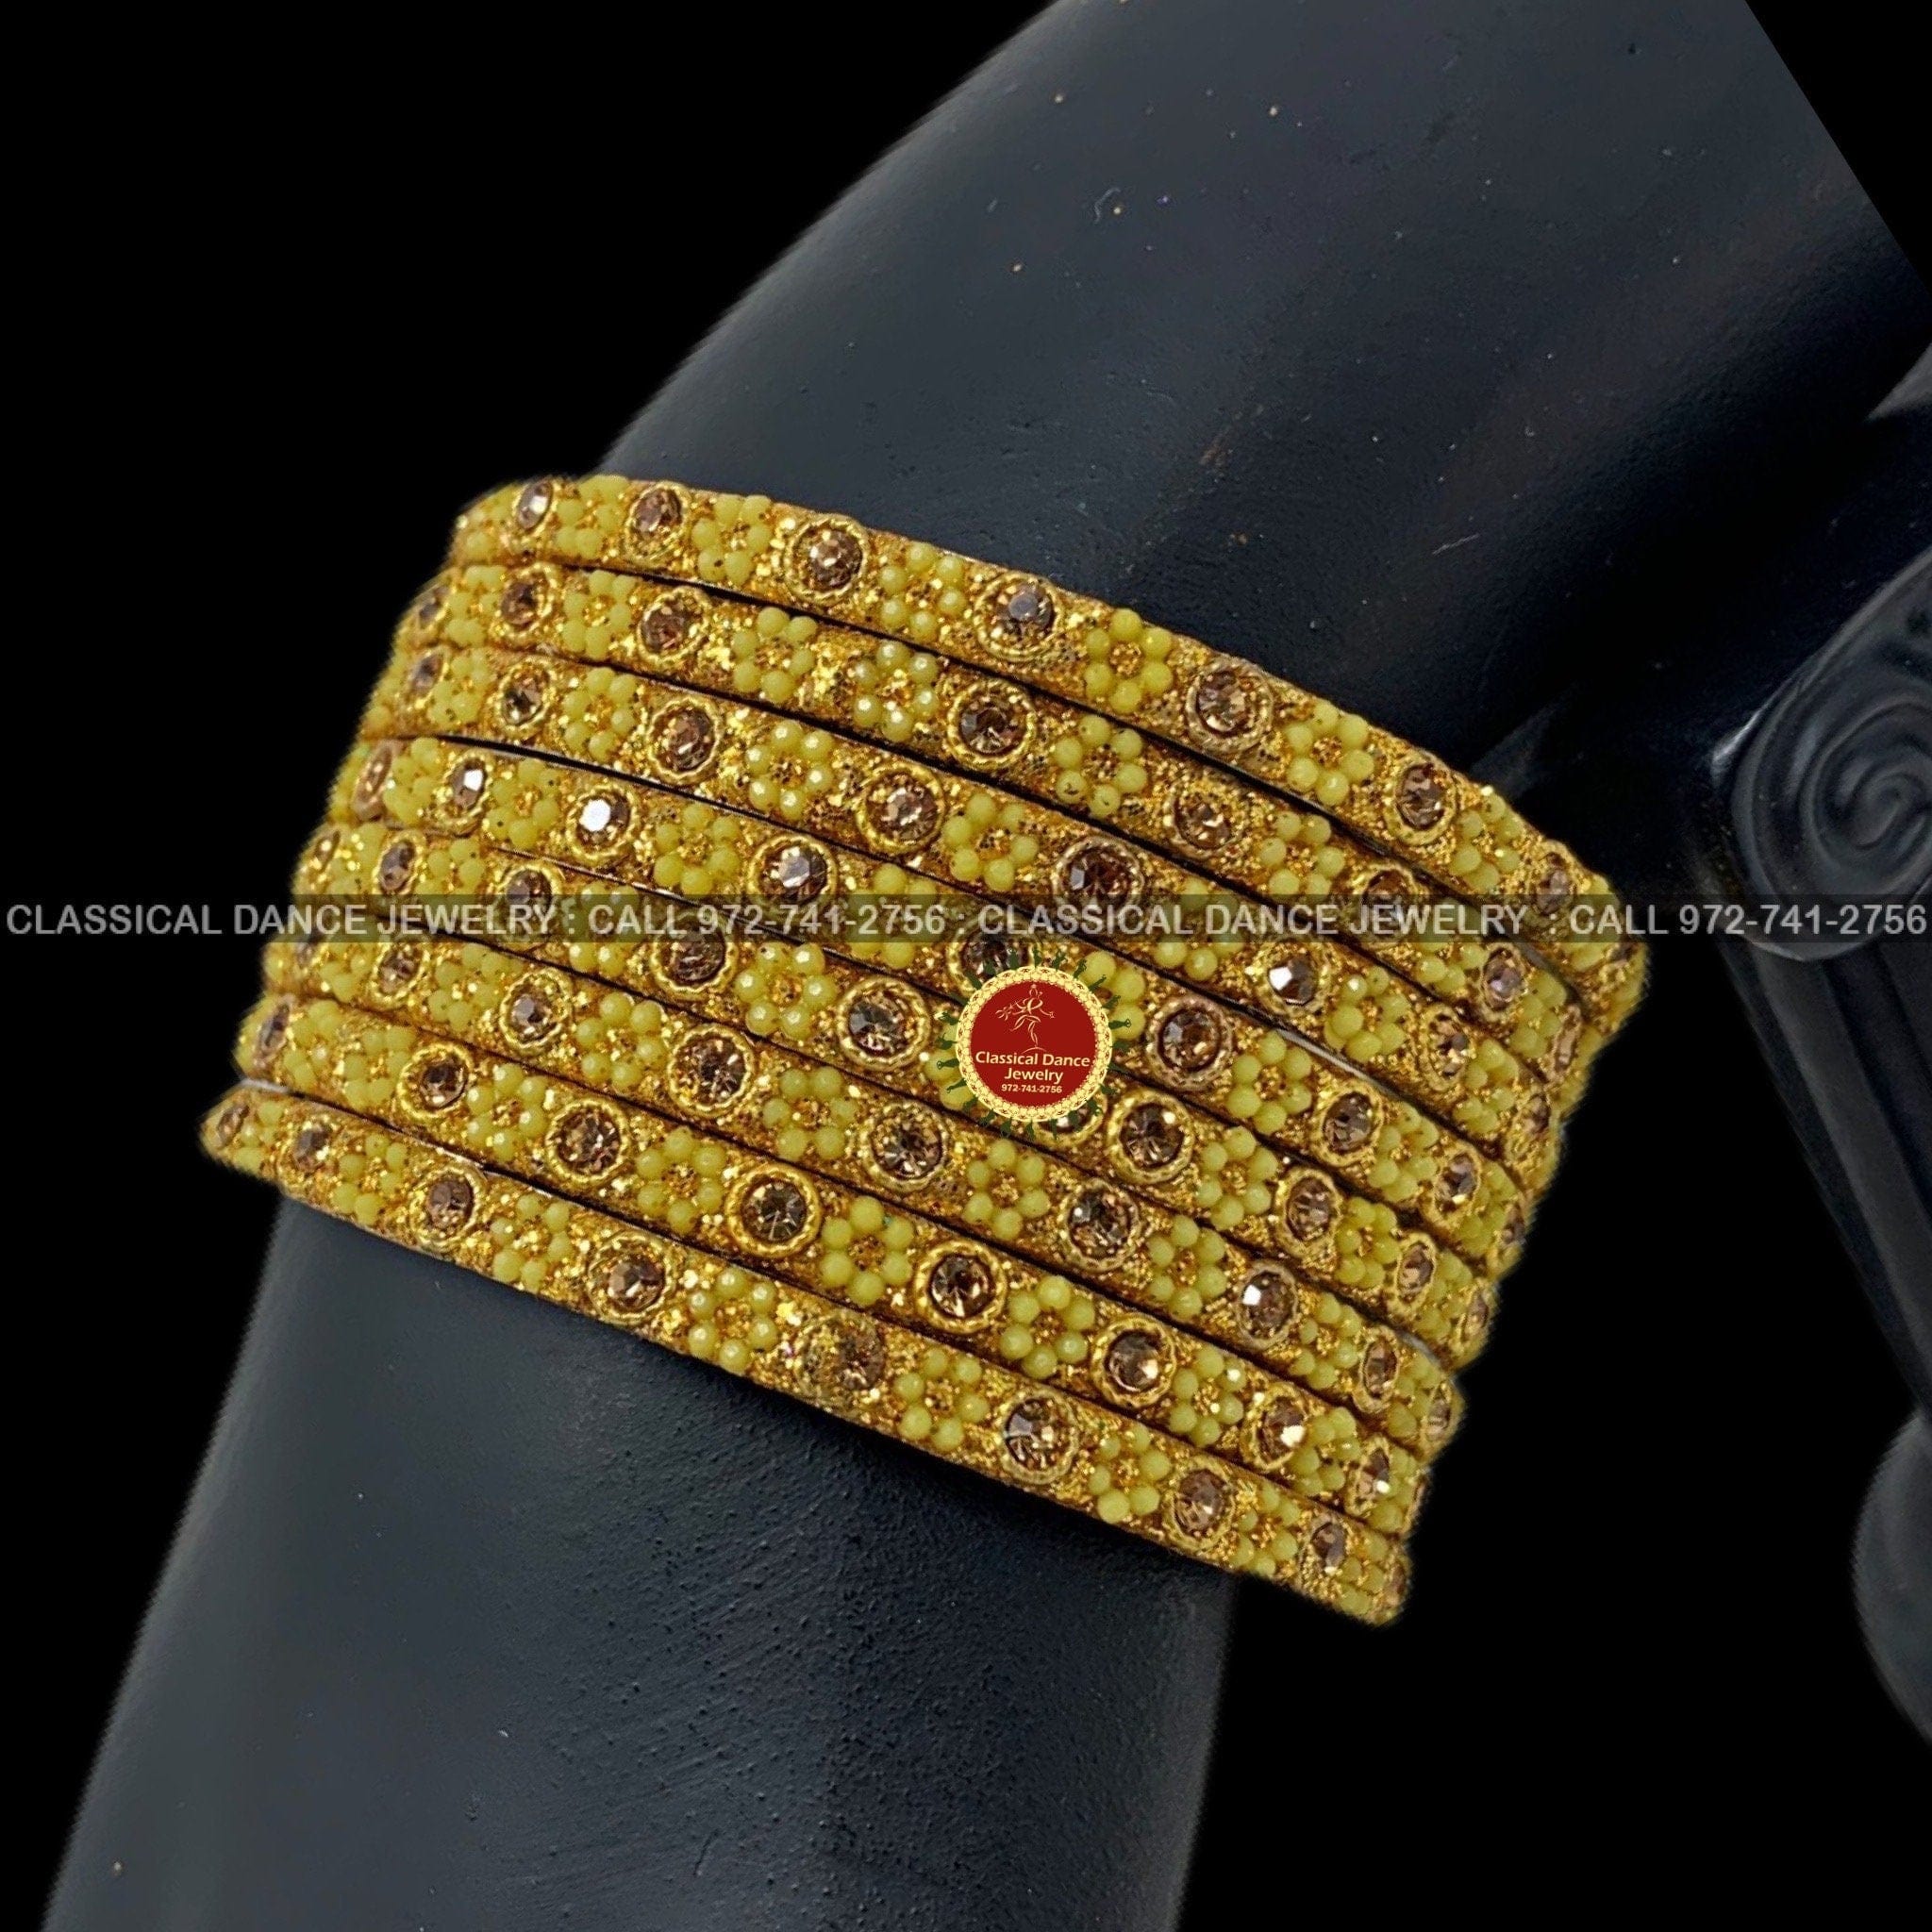 YELLOW Stone flower Studded Indian Jewelry 8 Bangles